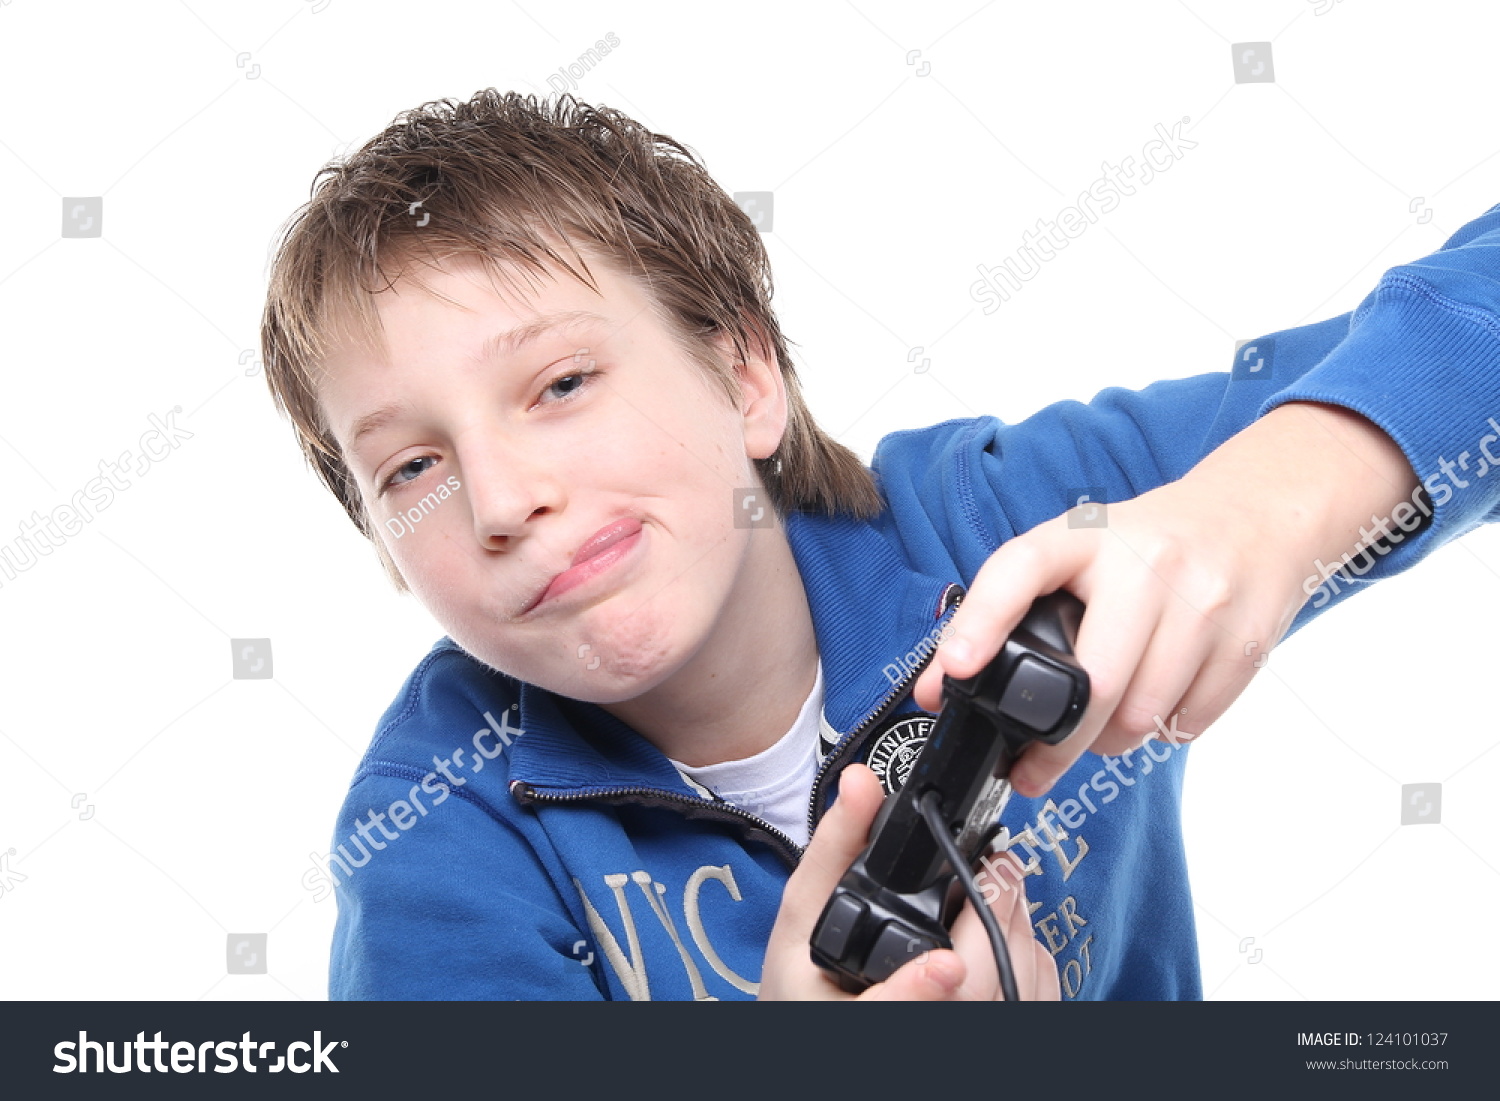 Boy playing with a joystick #124101037